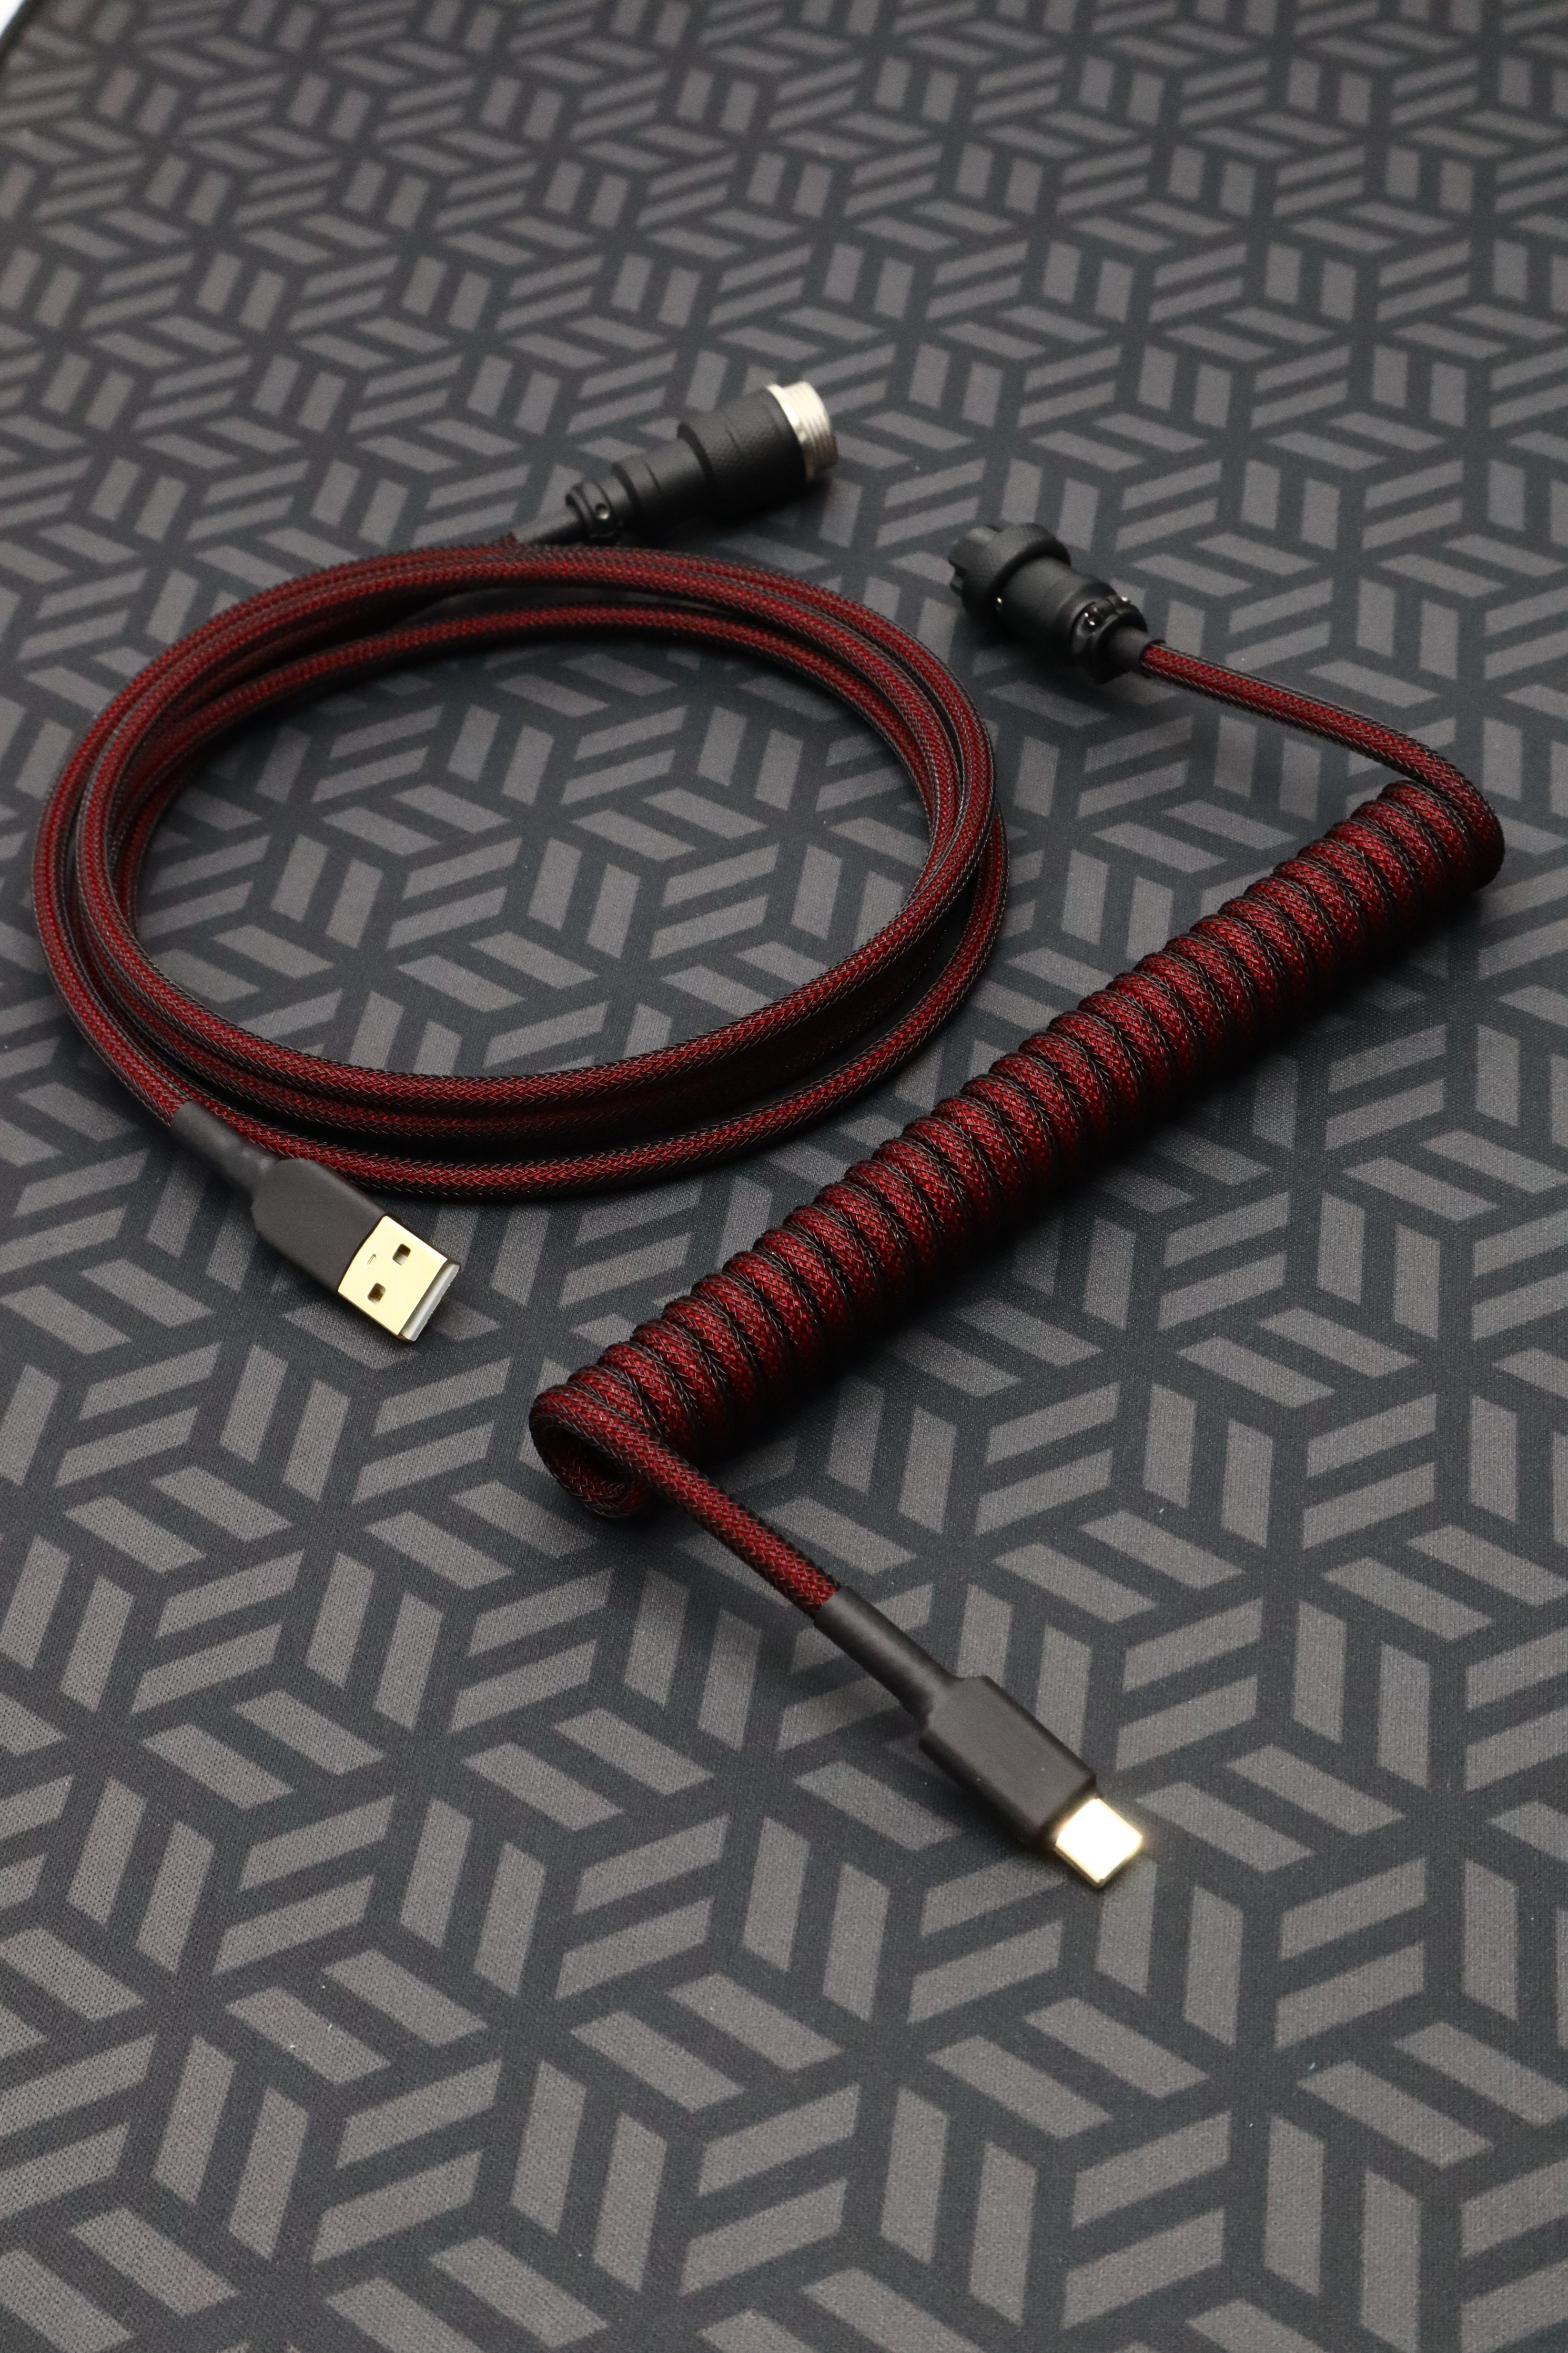 Mechanical Keyboard cable